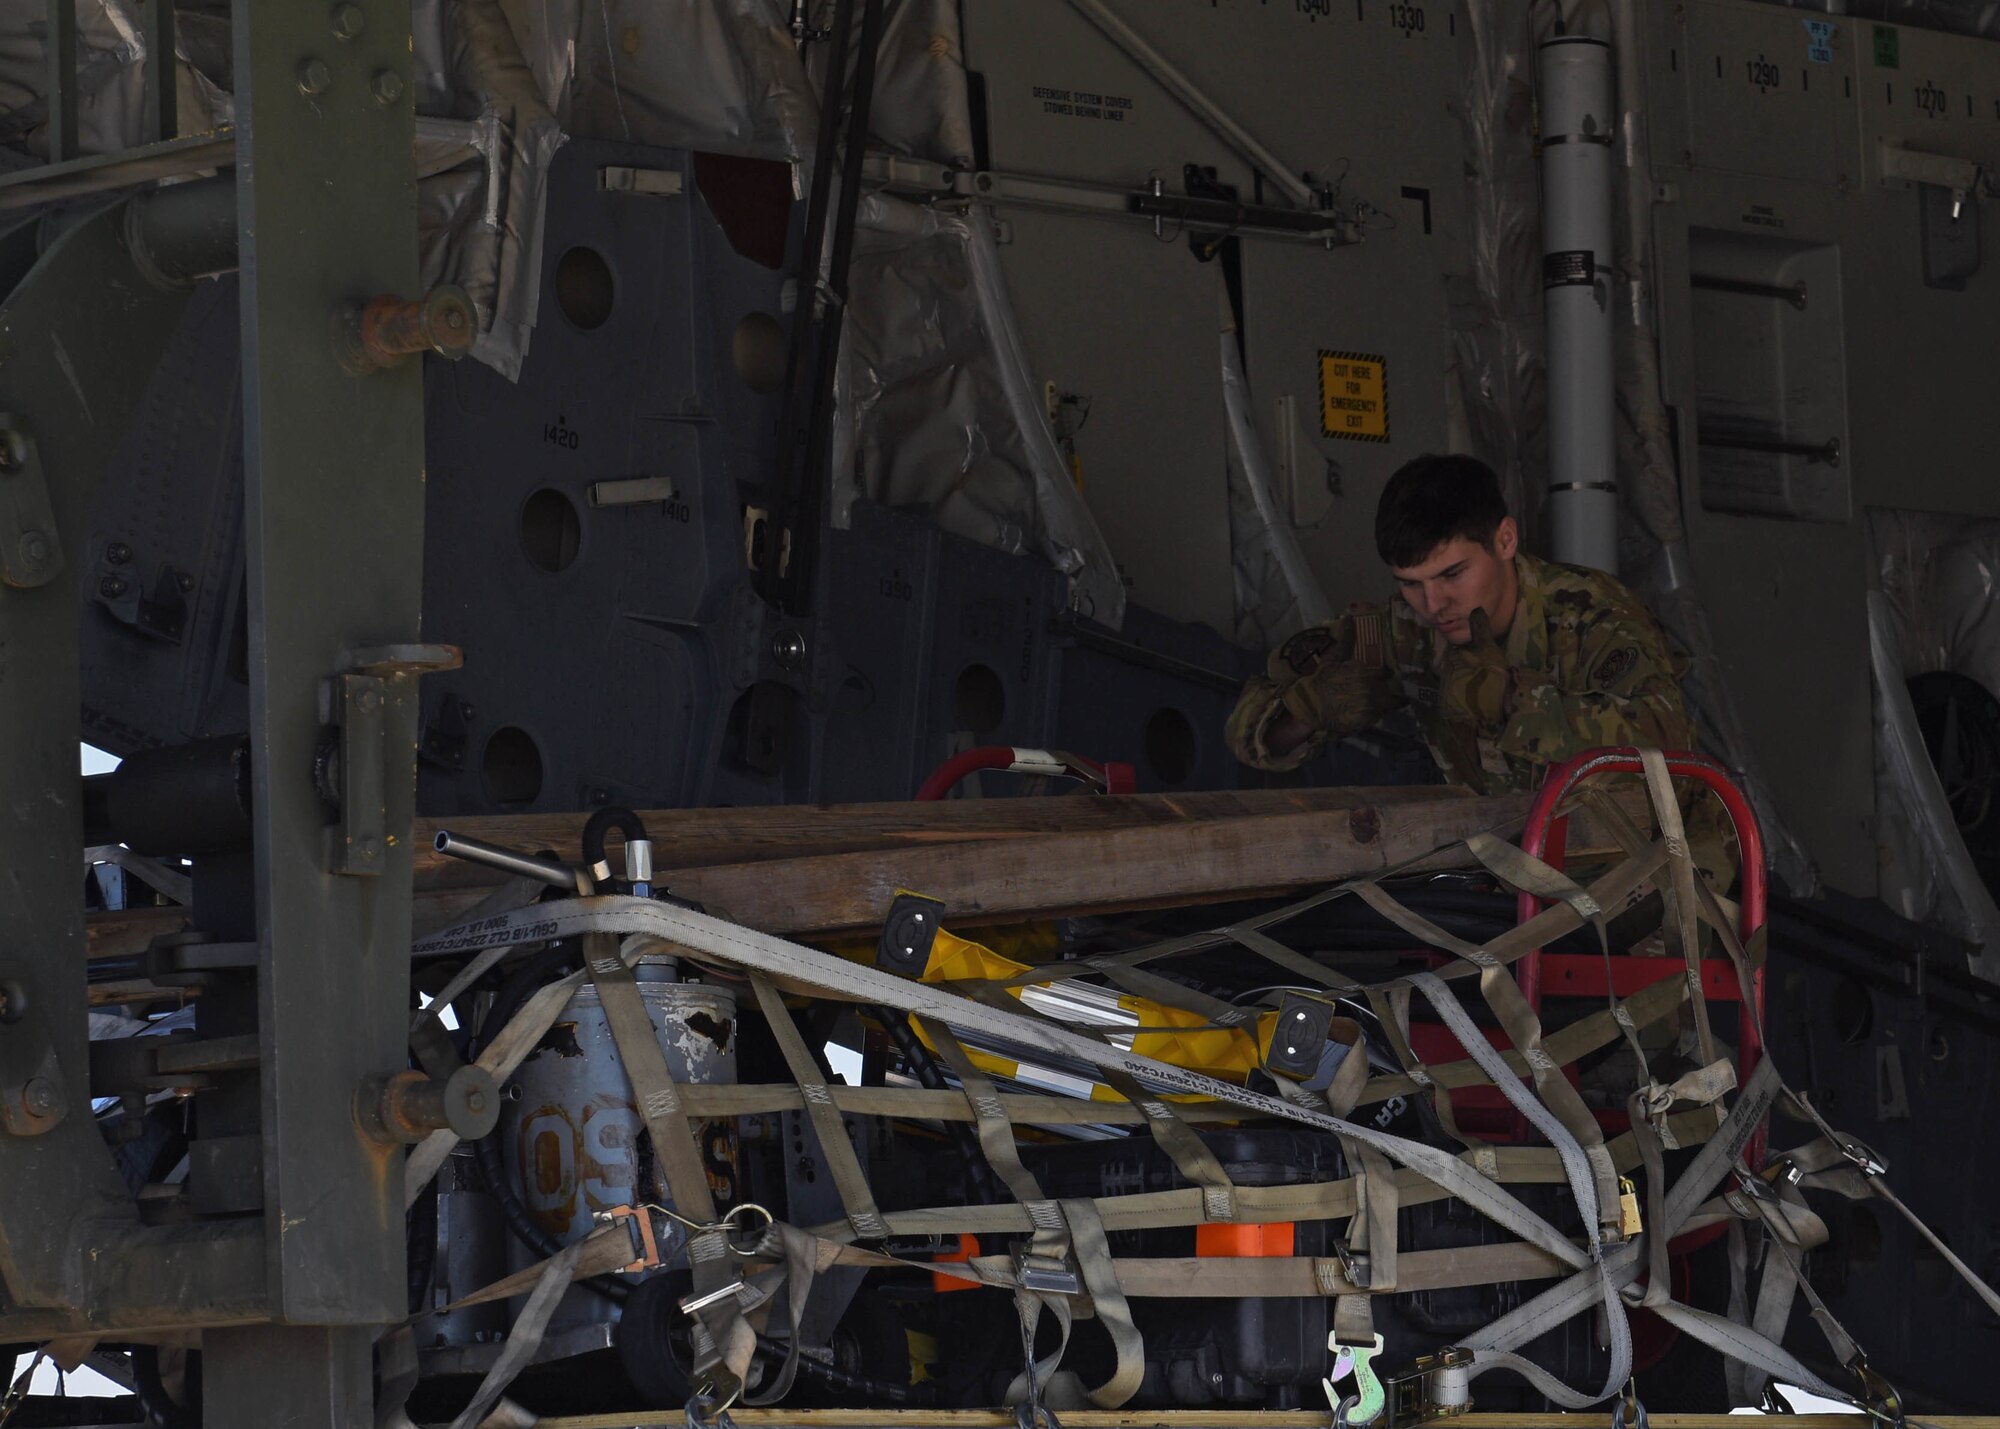 U.S. Air Force Airman 1st Class Tanner Brown, loadmaster with the 7th Airlift Squadron, guides the unloading of cargo from a C-17 Globemaster III aircraft from the 62d Airlift Wing during Exercise Rainier War 22B at Gowen Field, Boise, Idaho, Oct. 20, 2022. Exercise Rainier War is designed to evaluate and exercise Team McChord’s ability to generate, employ and sustain Rapid Global Mobility into and in support of U.S. Indo-Pacific areas of responsibility. (U.S. Air Force photo by Staff Sgt. Zoe Thacker)